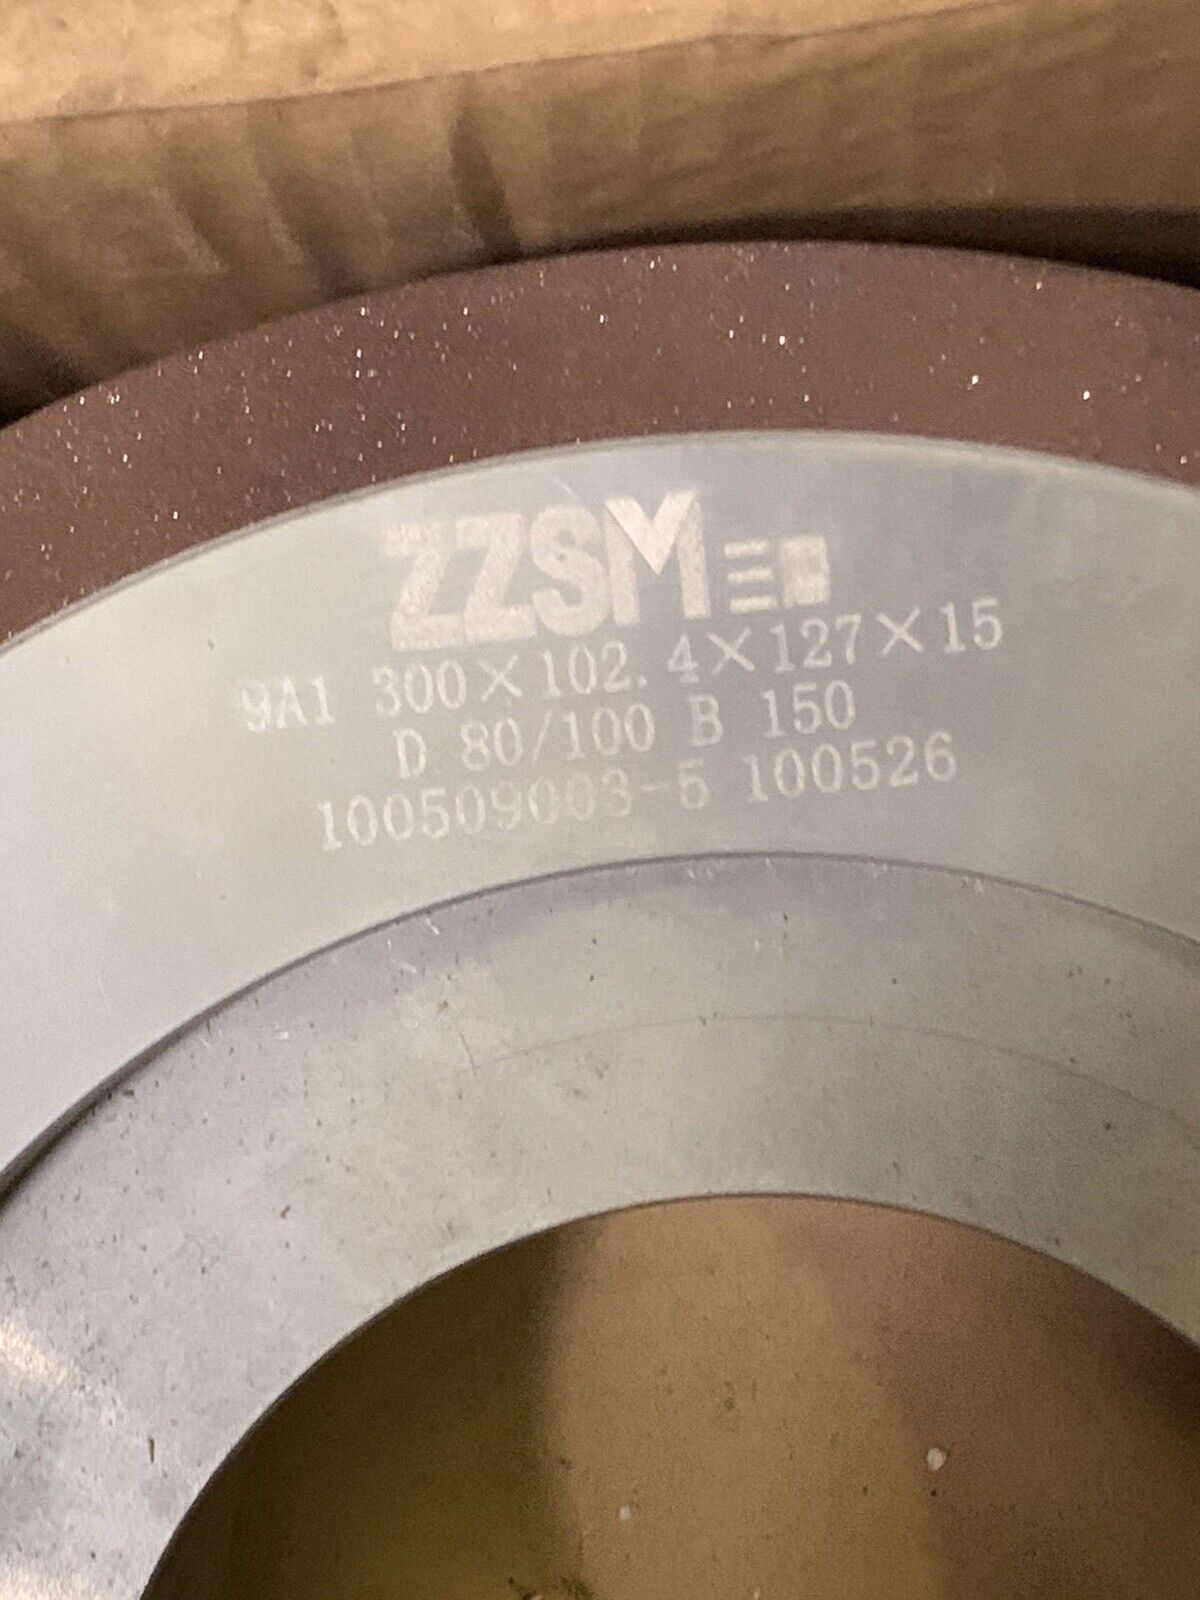 ATT’ ROYAL MASTER OWNERS grinding wheel 12x4x5 centerless. 3 available $700 Each